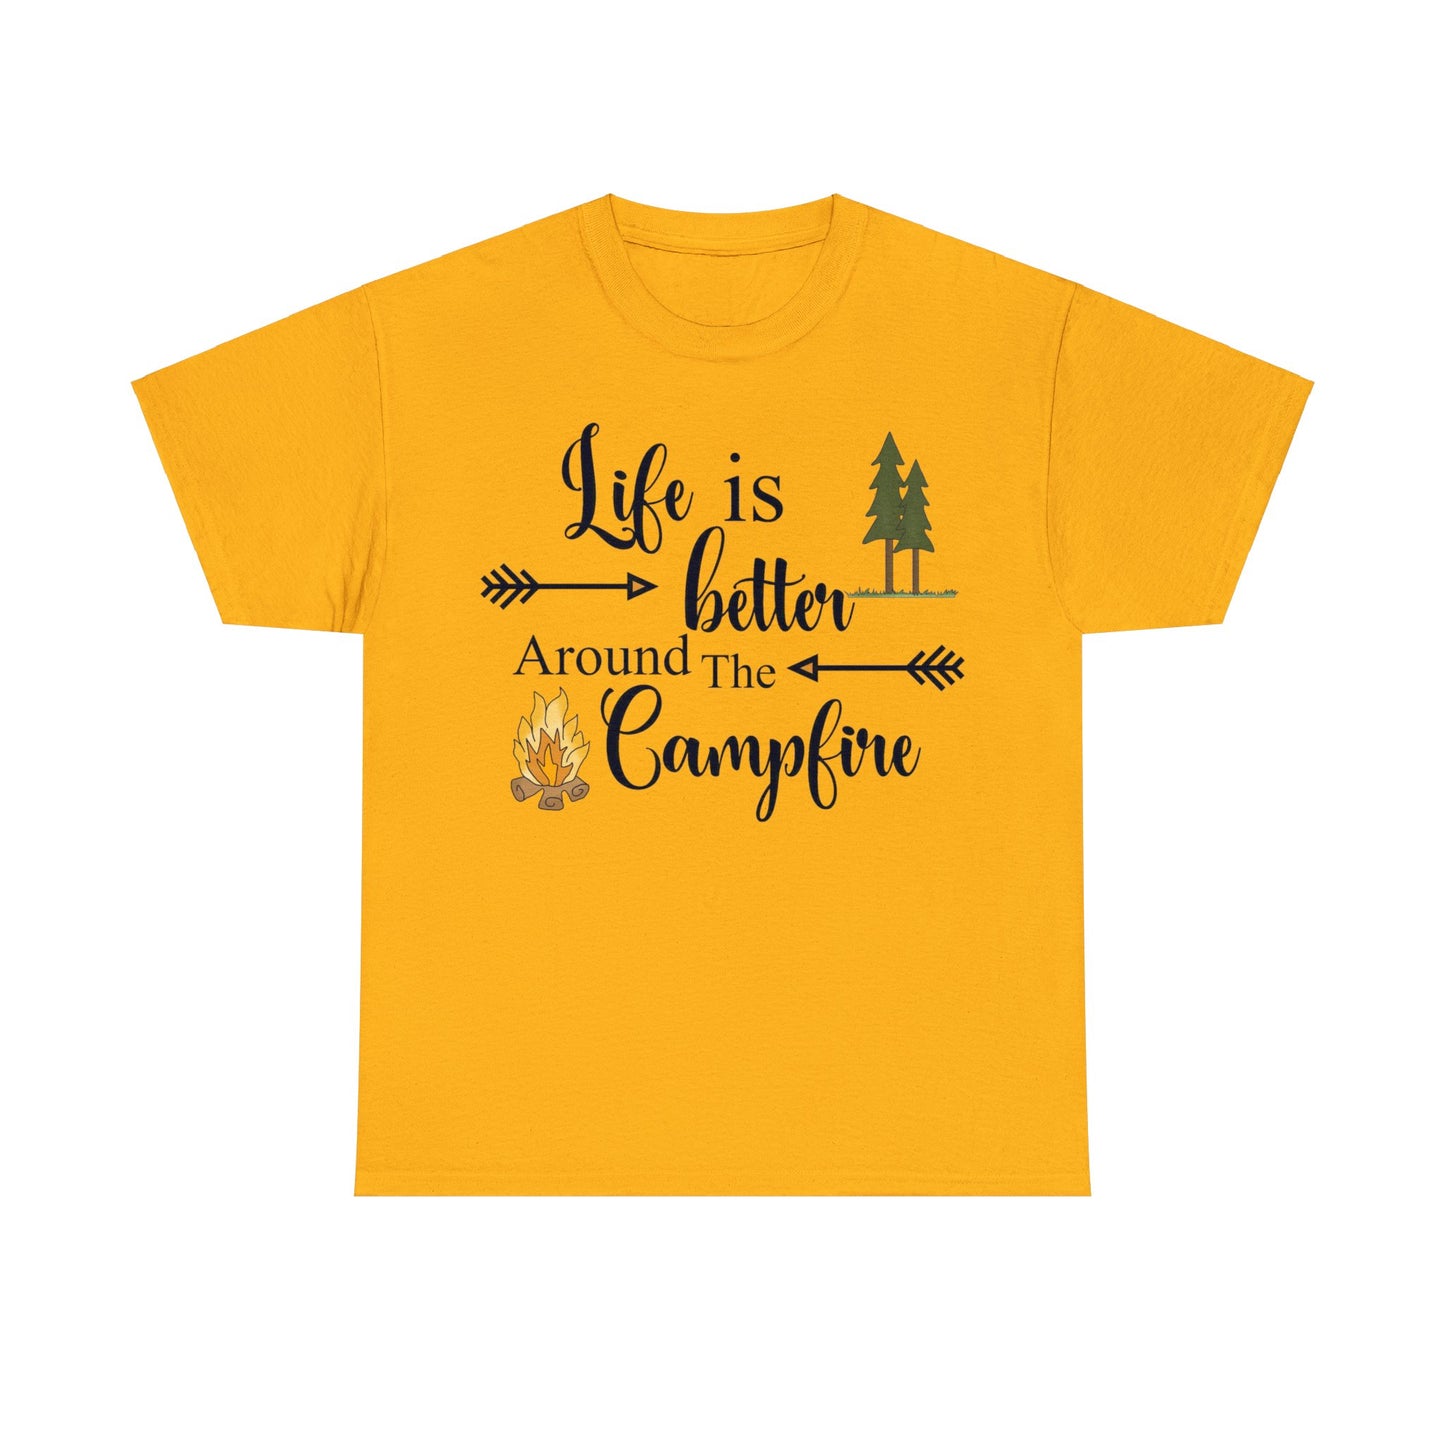 Take a break from the daily grind and embrace the great outdoors with our "Life Is Better Around The Campfire" tee. Made from heavy cotton, this shirt is perfect for your camping adventures. Its playful message will remind you to enjoy life's simple pleasures (like s'mores) around the fire.